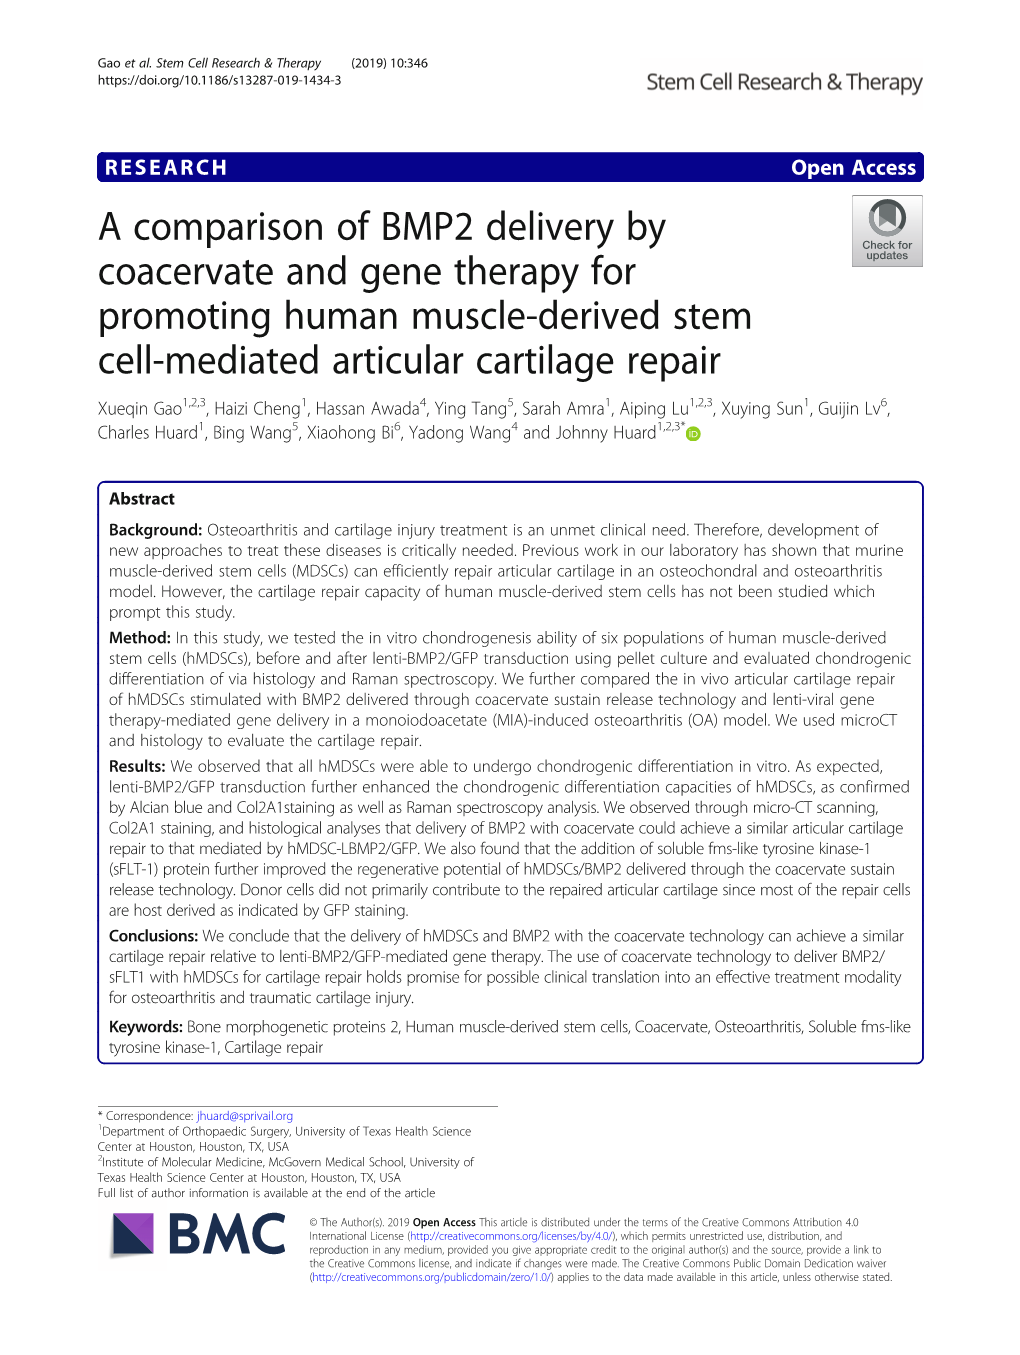 A Comparison of BMP2 Delivery by Coacervate and Gene Therapy For